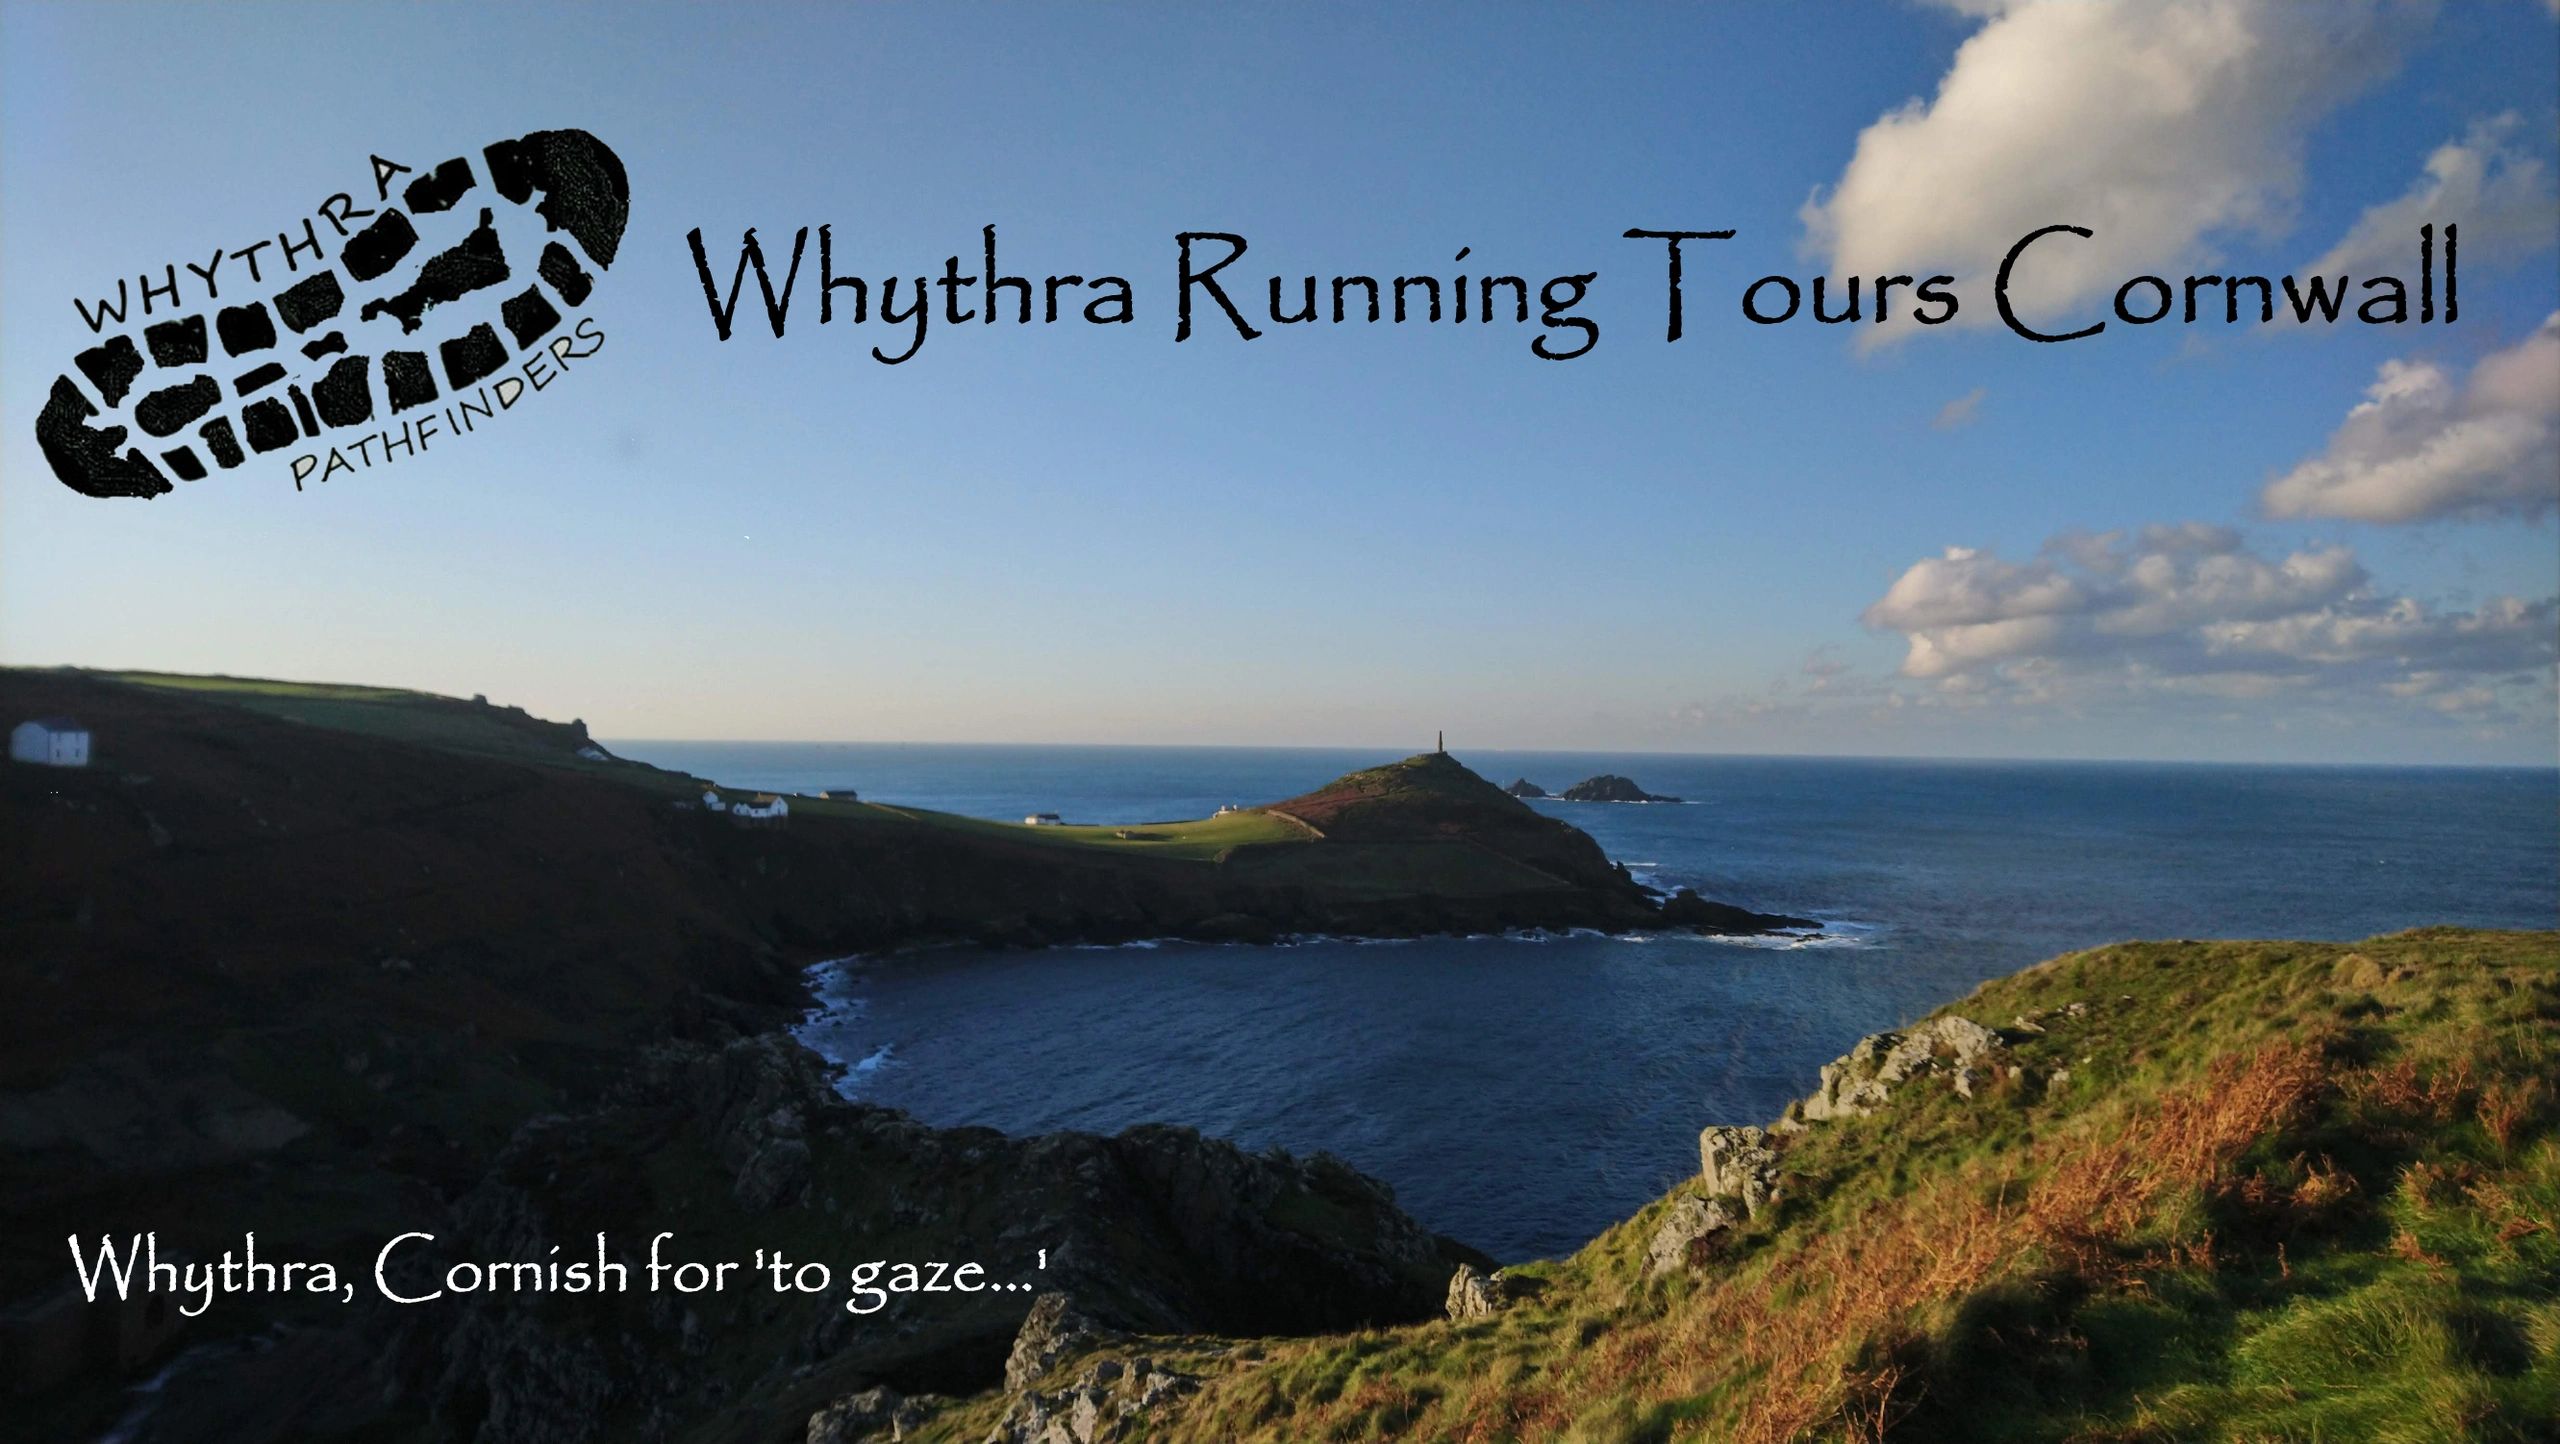 Whythra Running Tours Cornwall, offering running tours in Cornwall